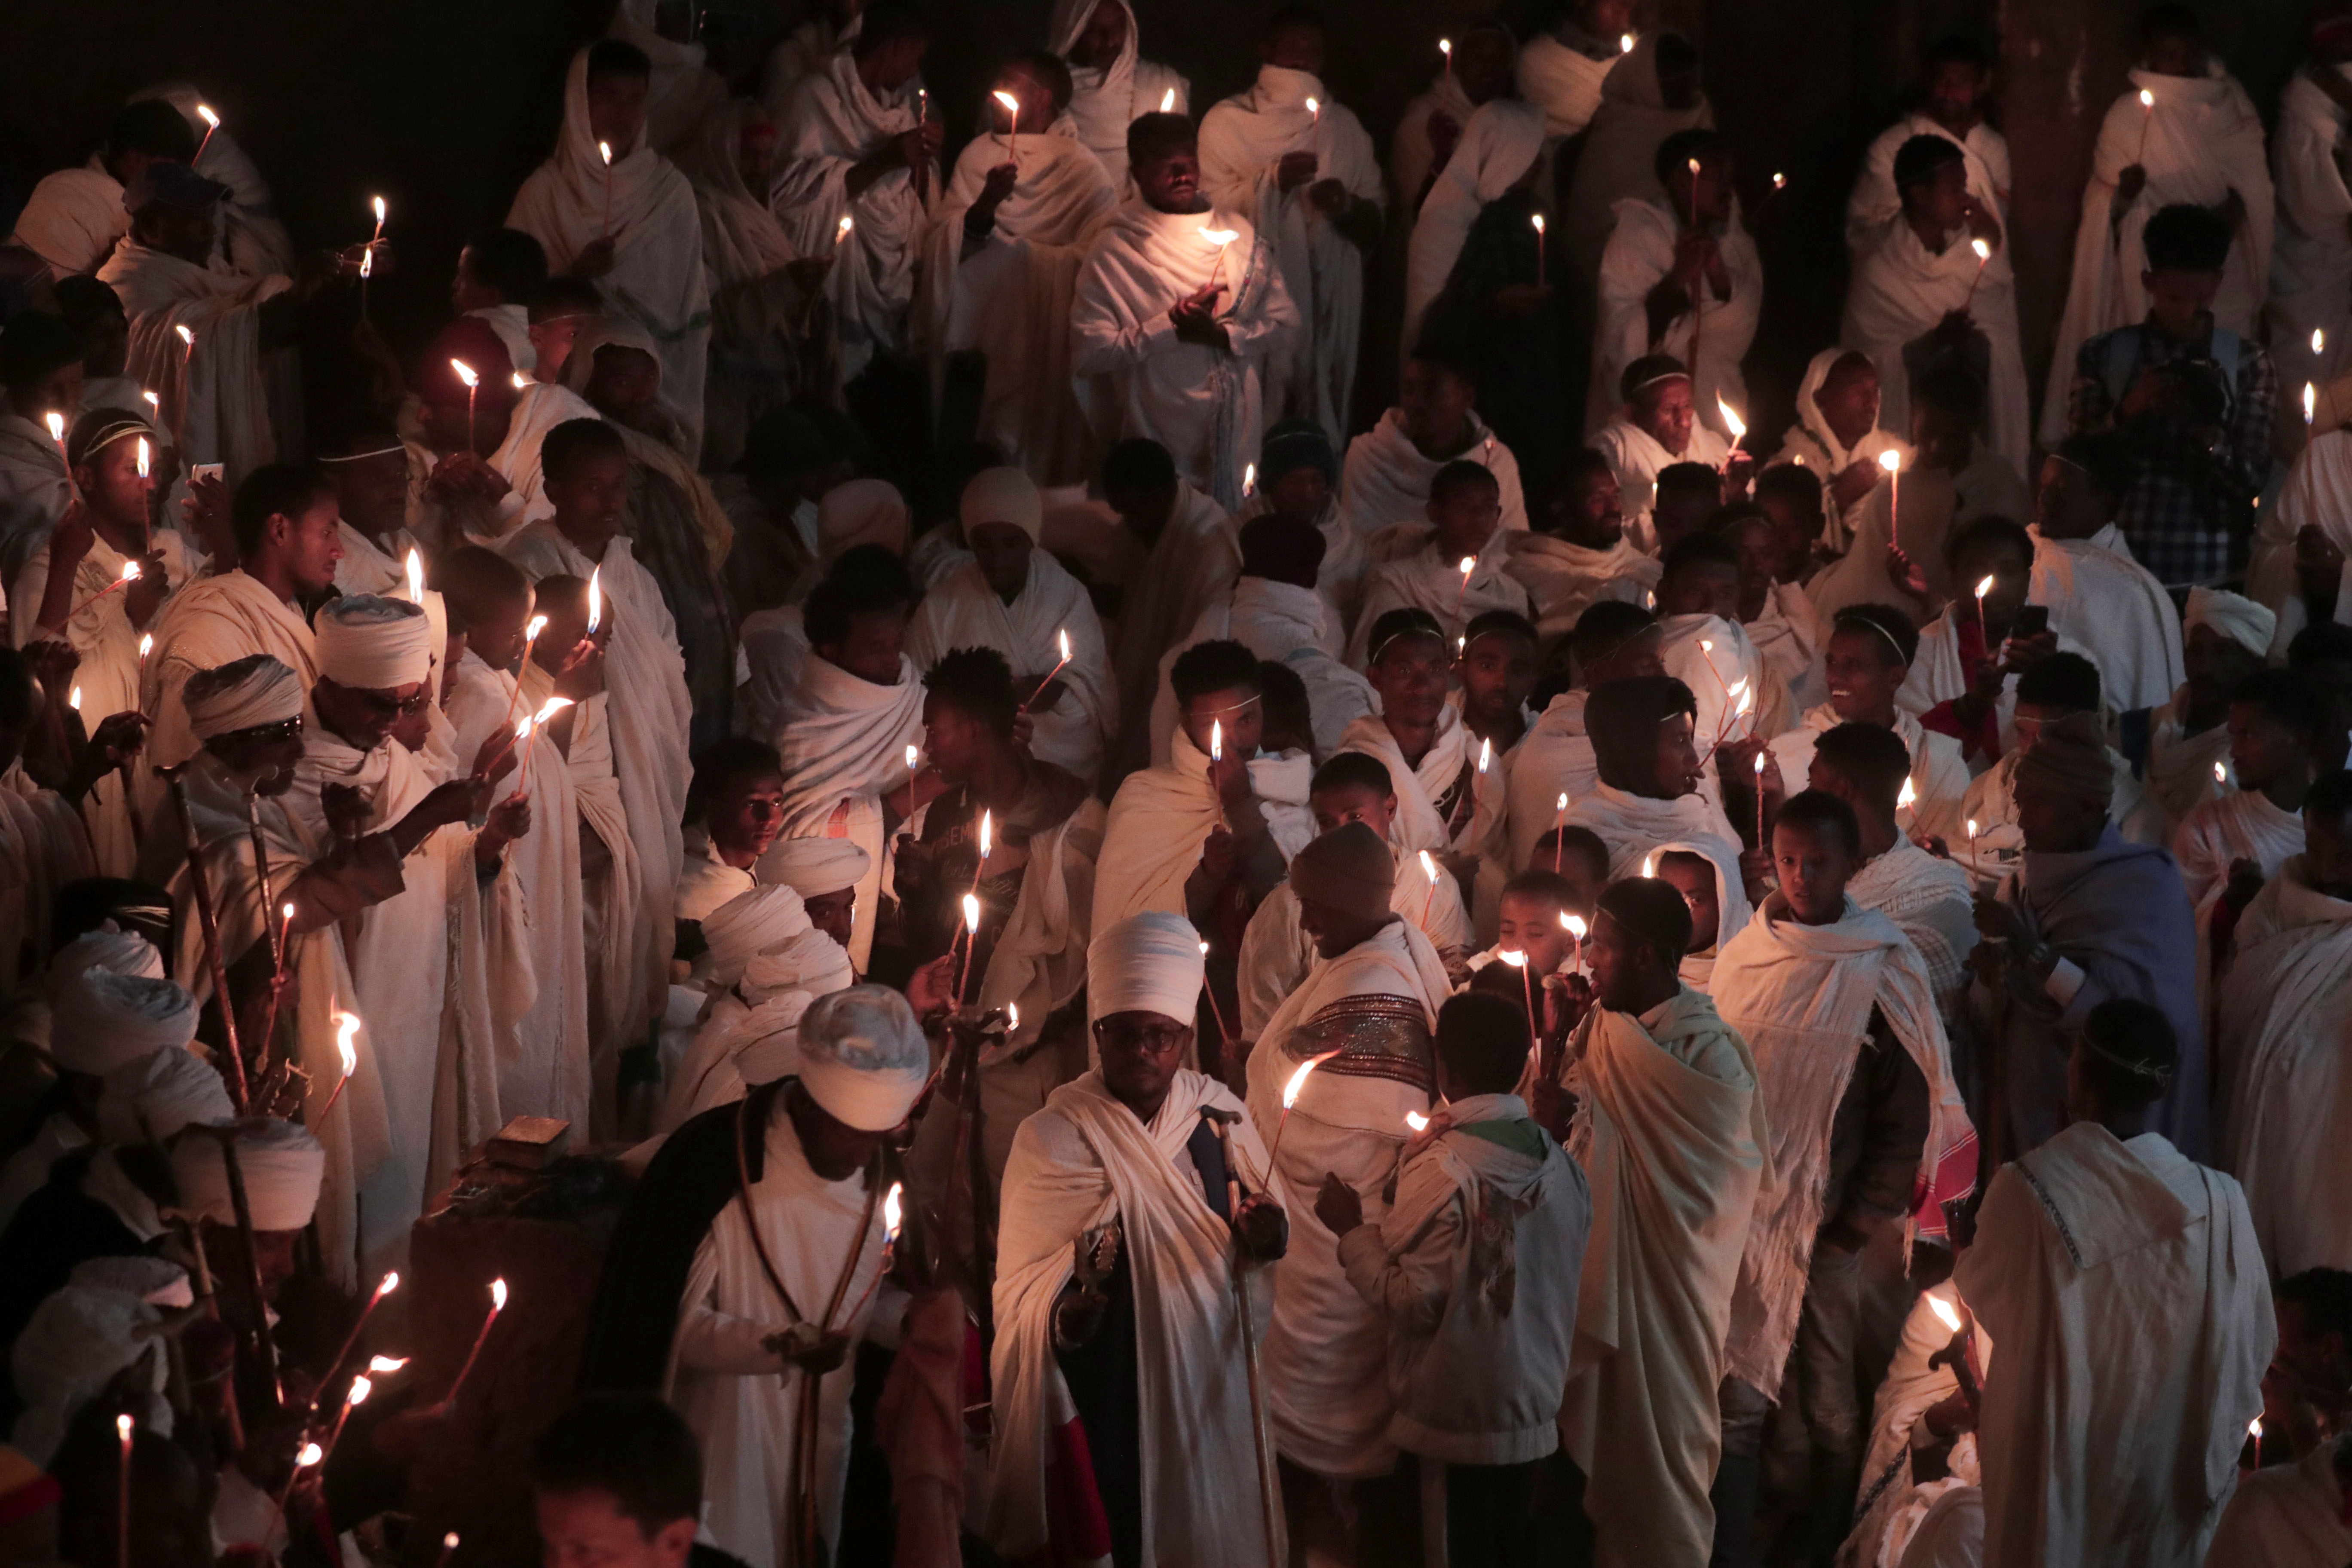 Ethiopian Orthodox pilgrims attend the Easter Eve celebration at the St. Mary Rock-Hewn church in Lalibela